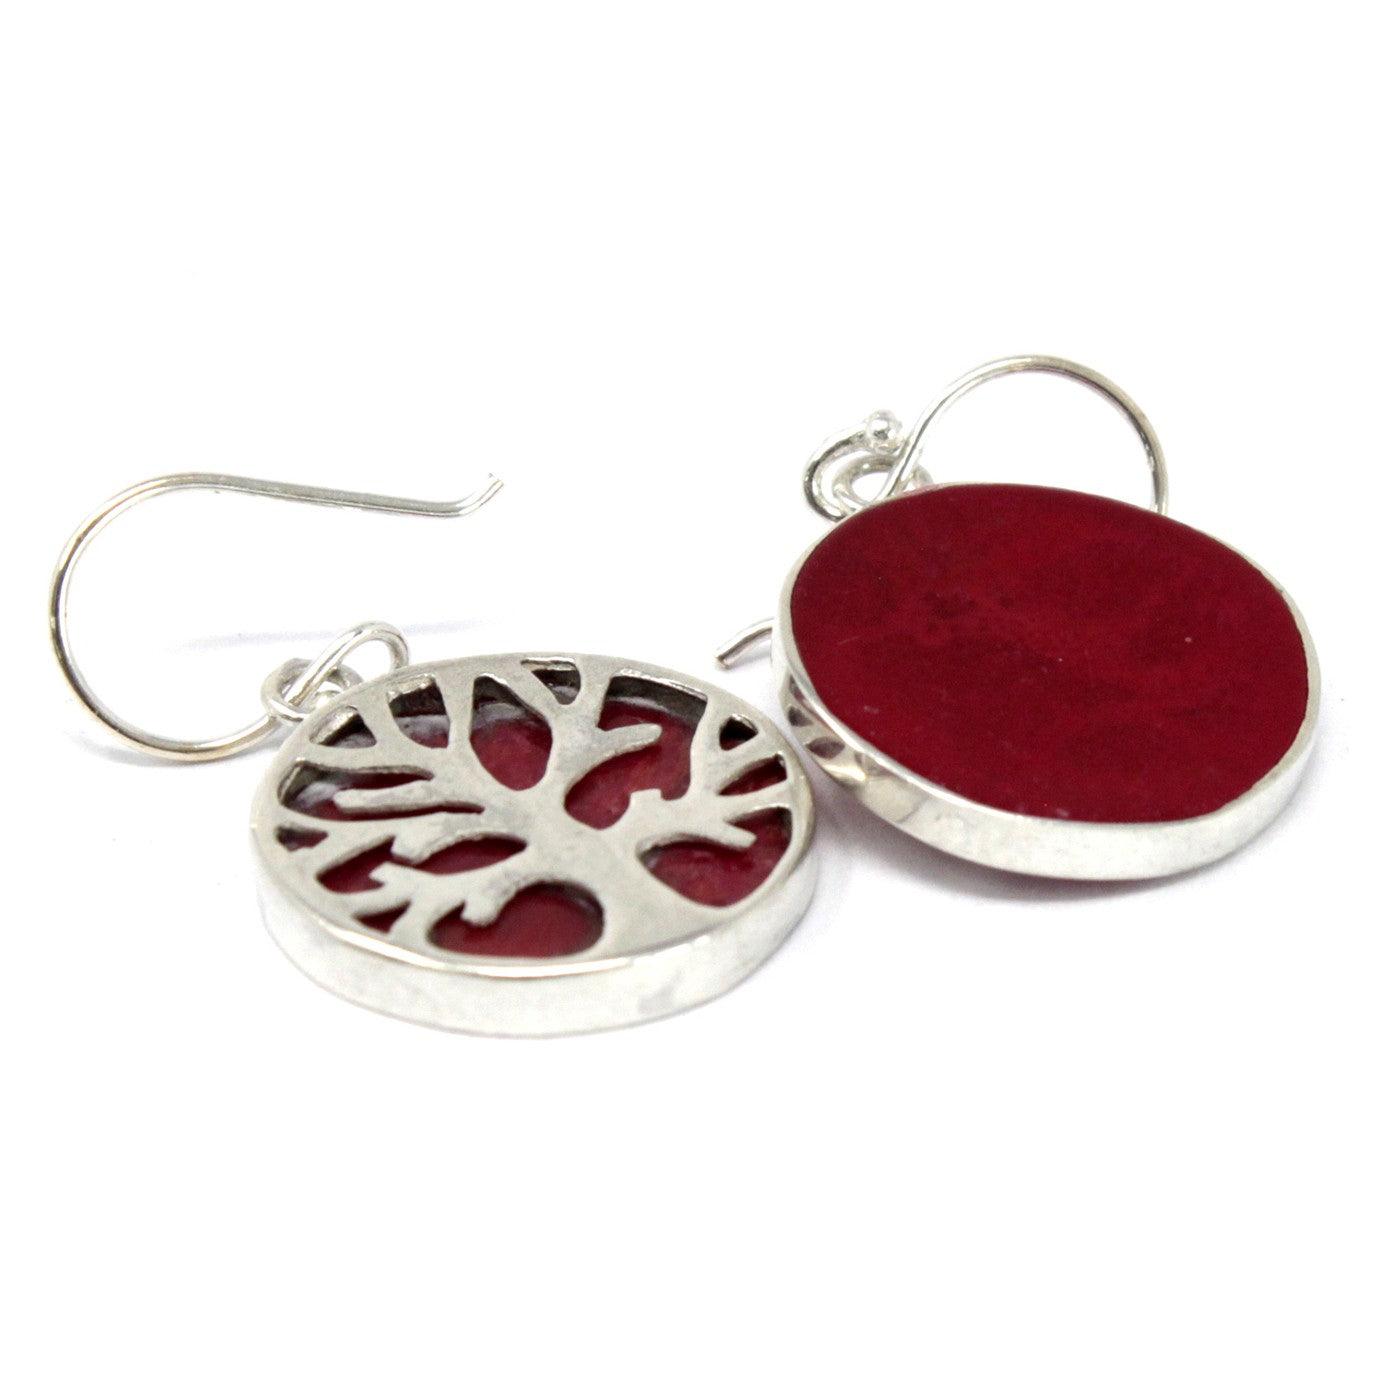 Tree of Life Silver Earrings 15mm - Coral Effect - Charming Spaces